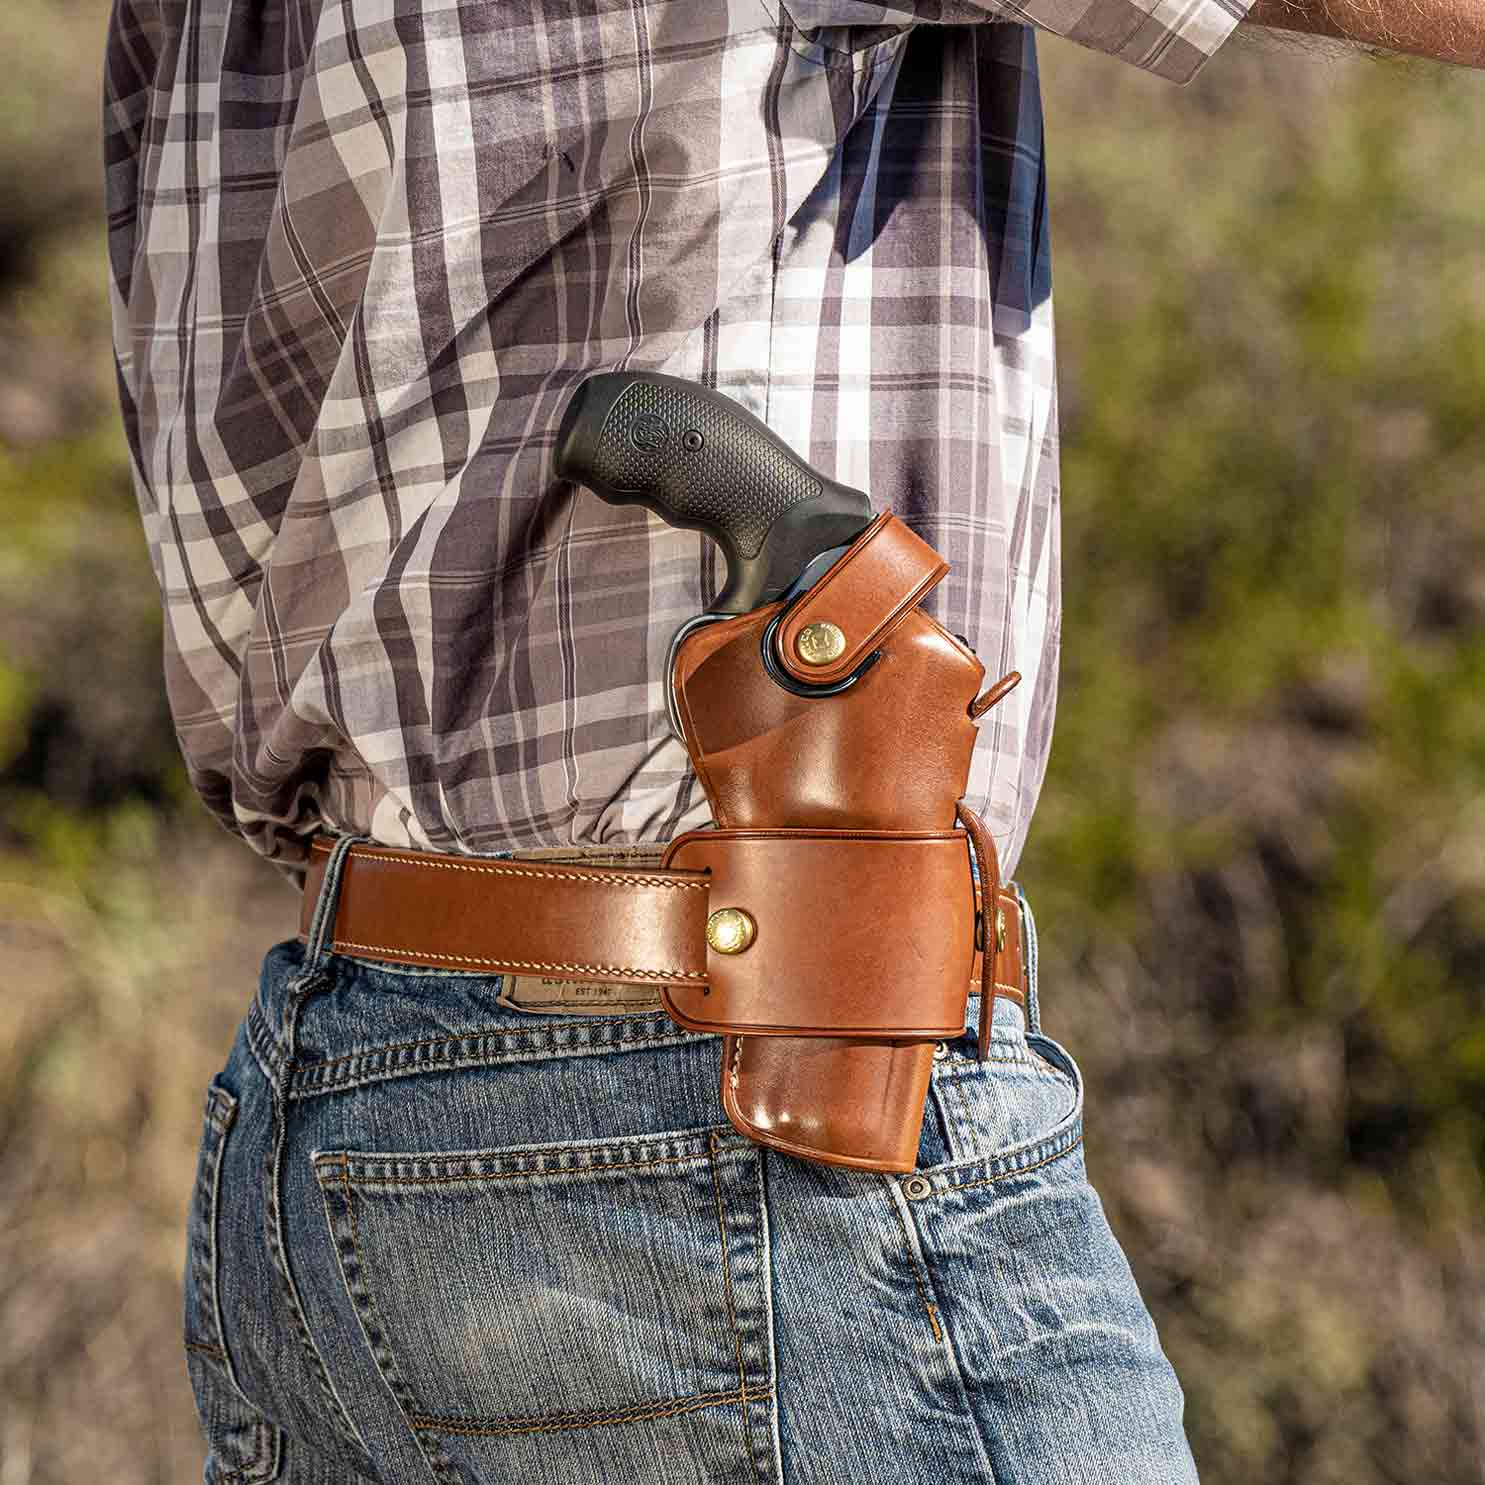 WHEELGUNNER 2.0 BELT HOLSTER: Collections: New + Coming Soon